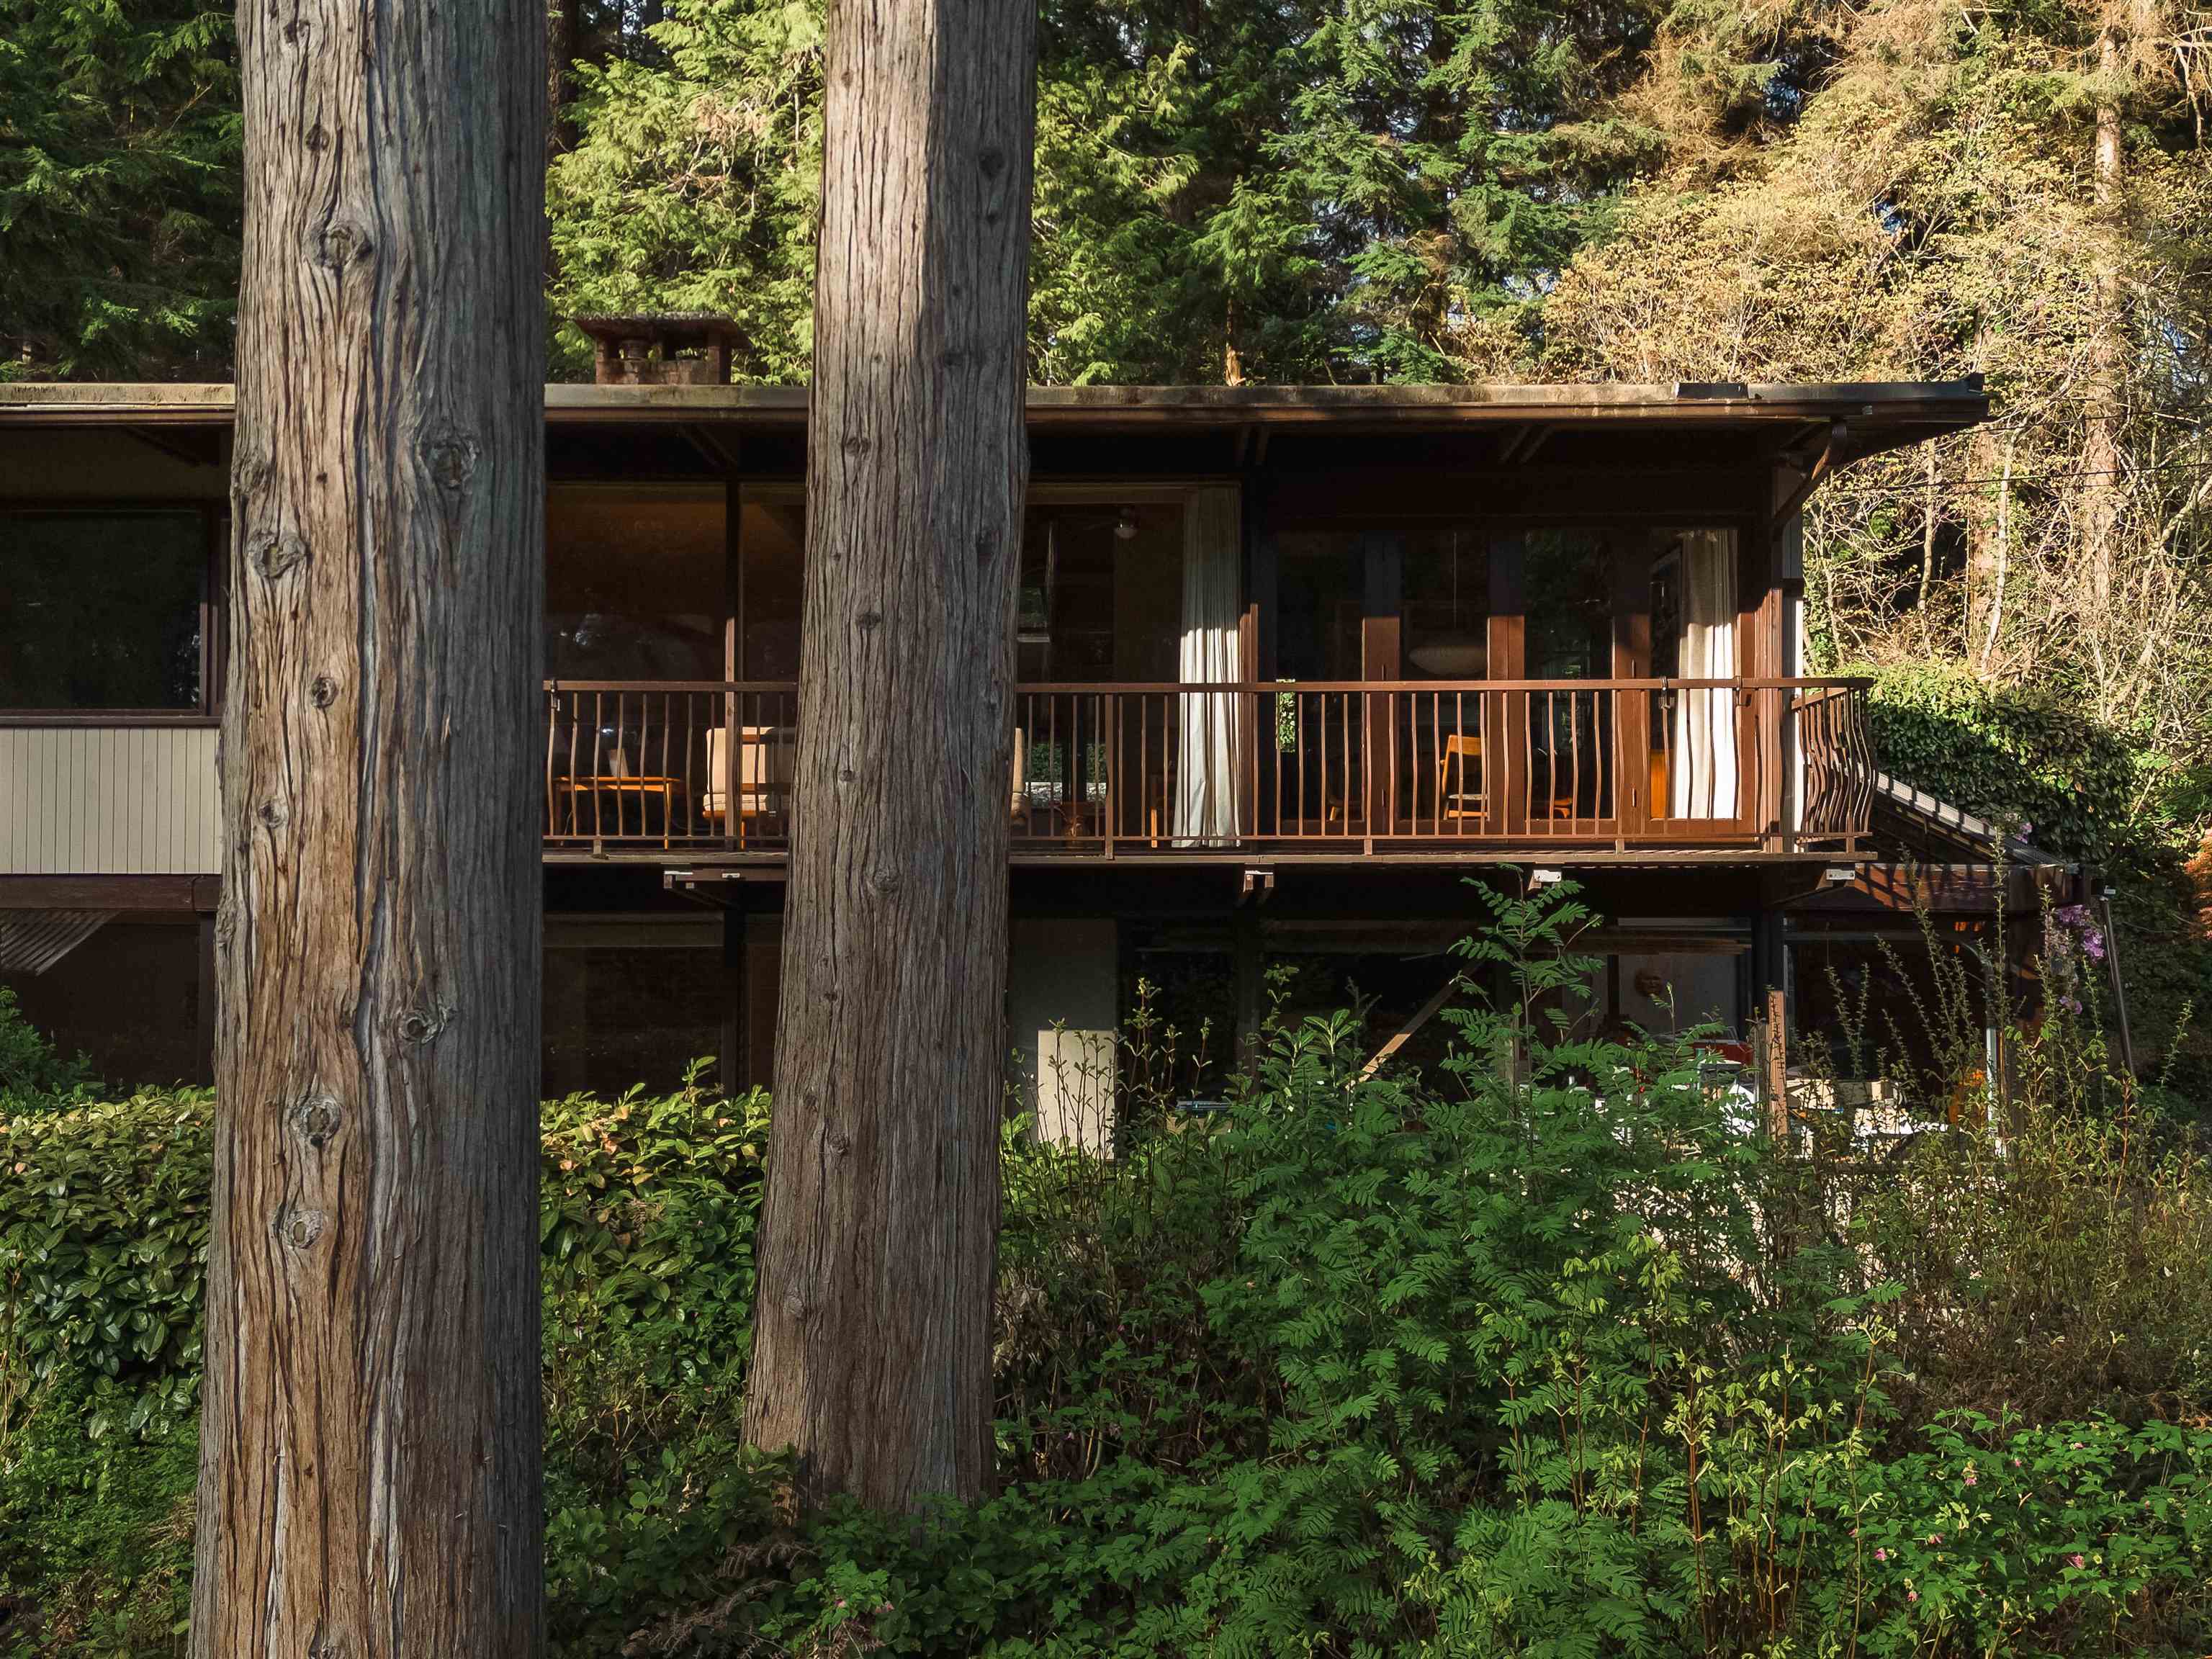 Listing image of 4249 CAPILANO ROAD